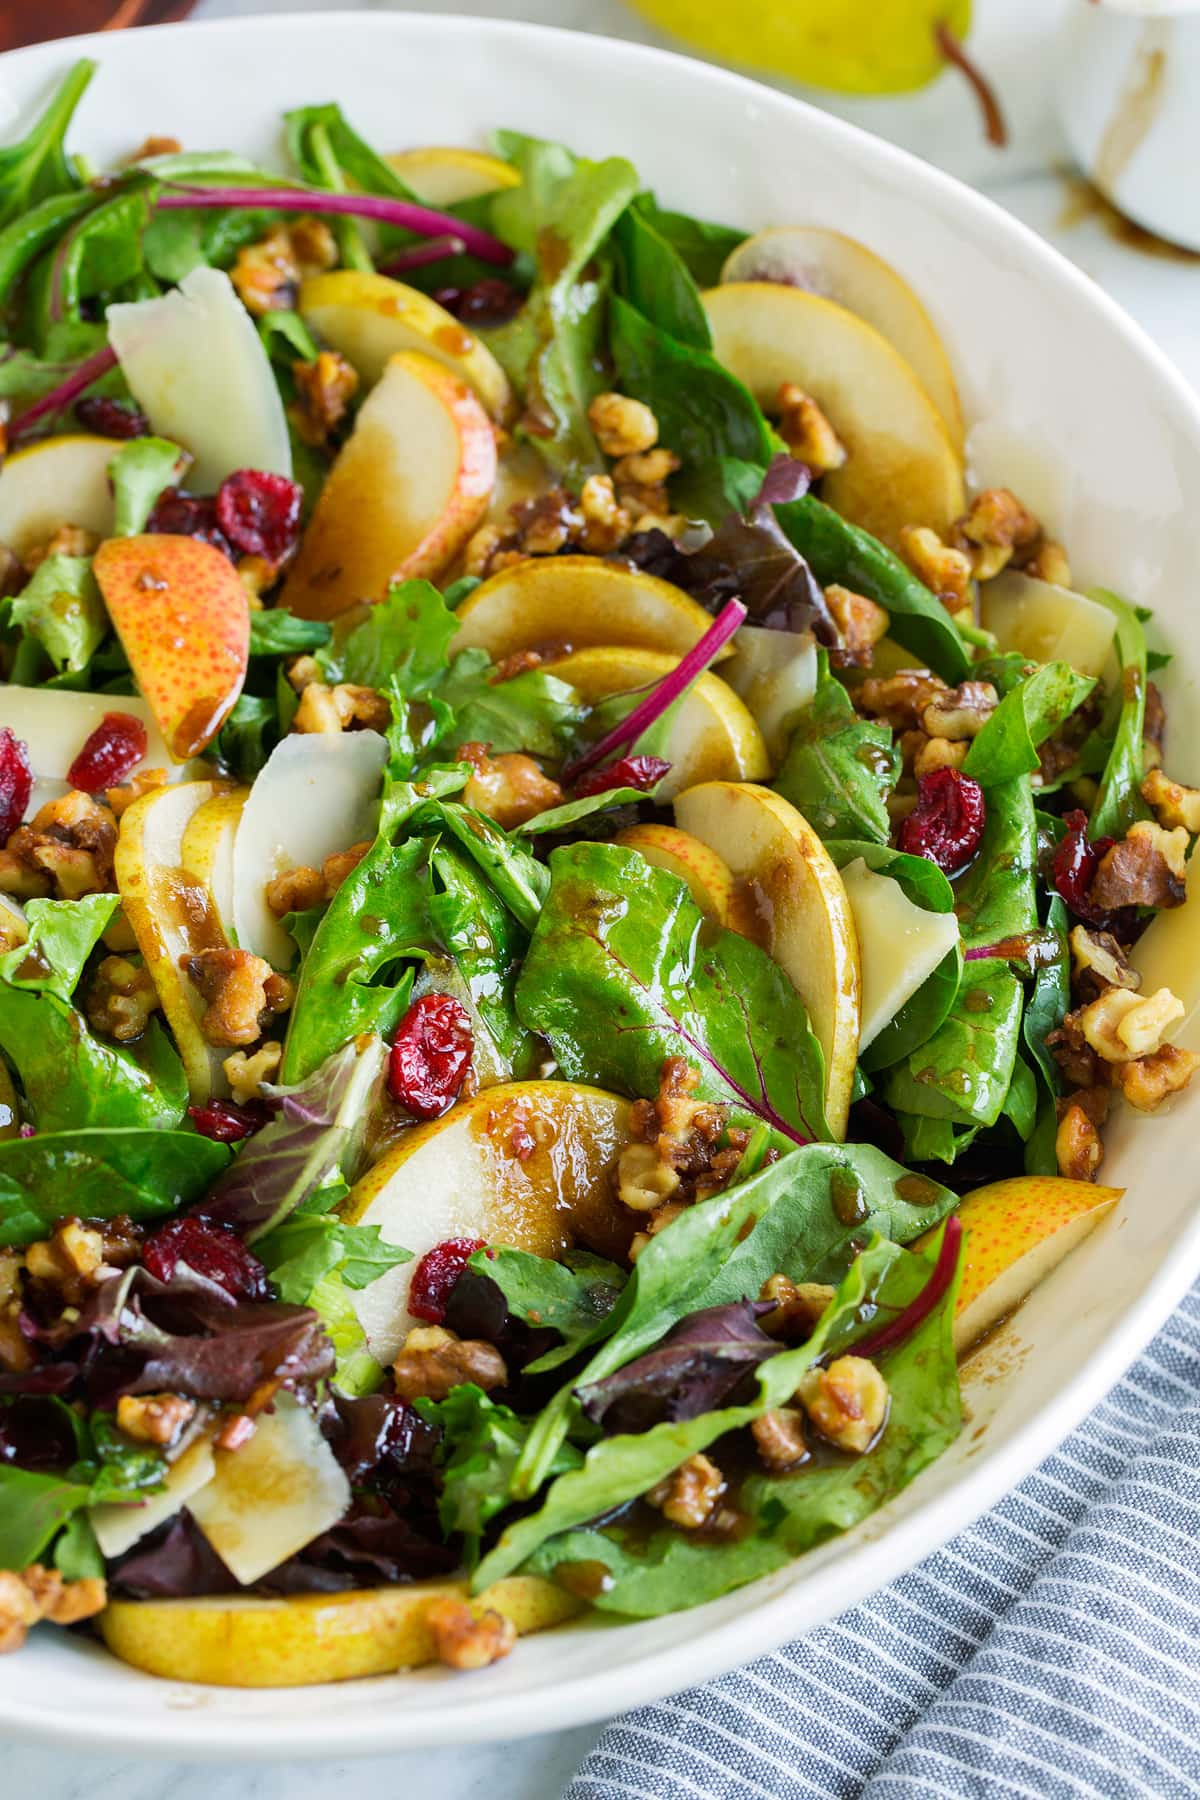 Pear Salad Recipes
 Autumn Pear Salad with Can d Walnuts and Balsamic